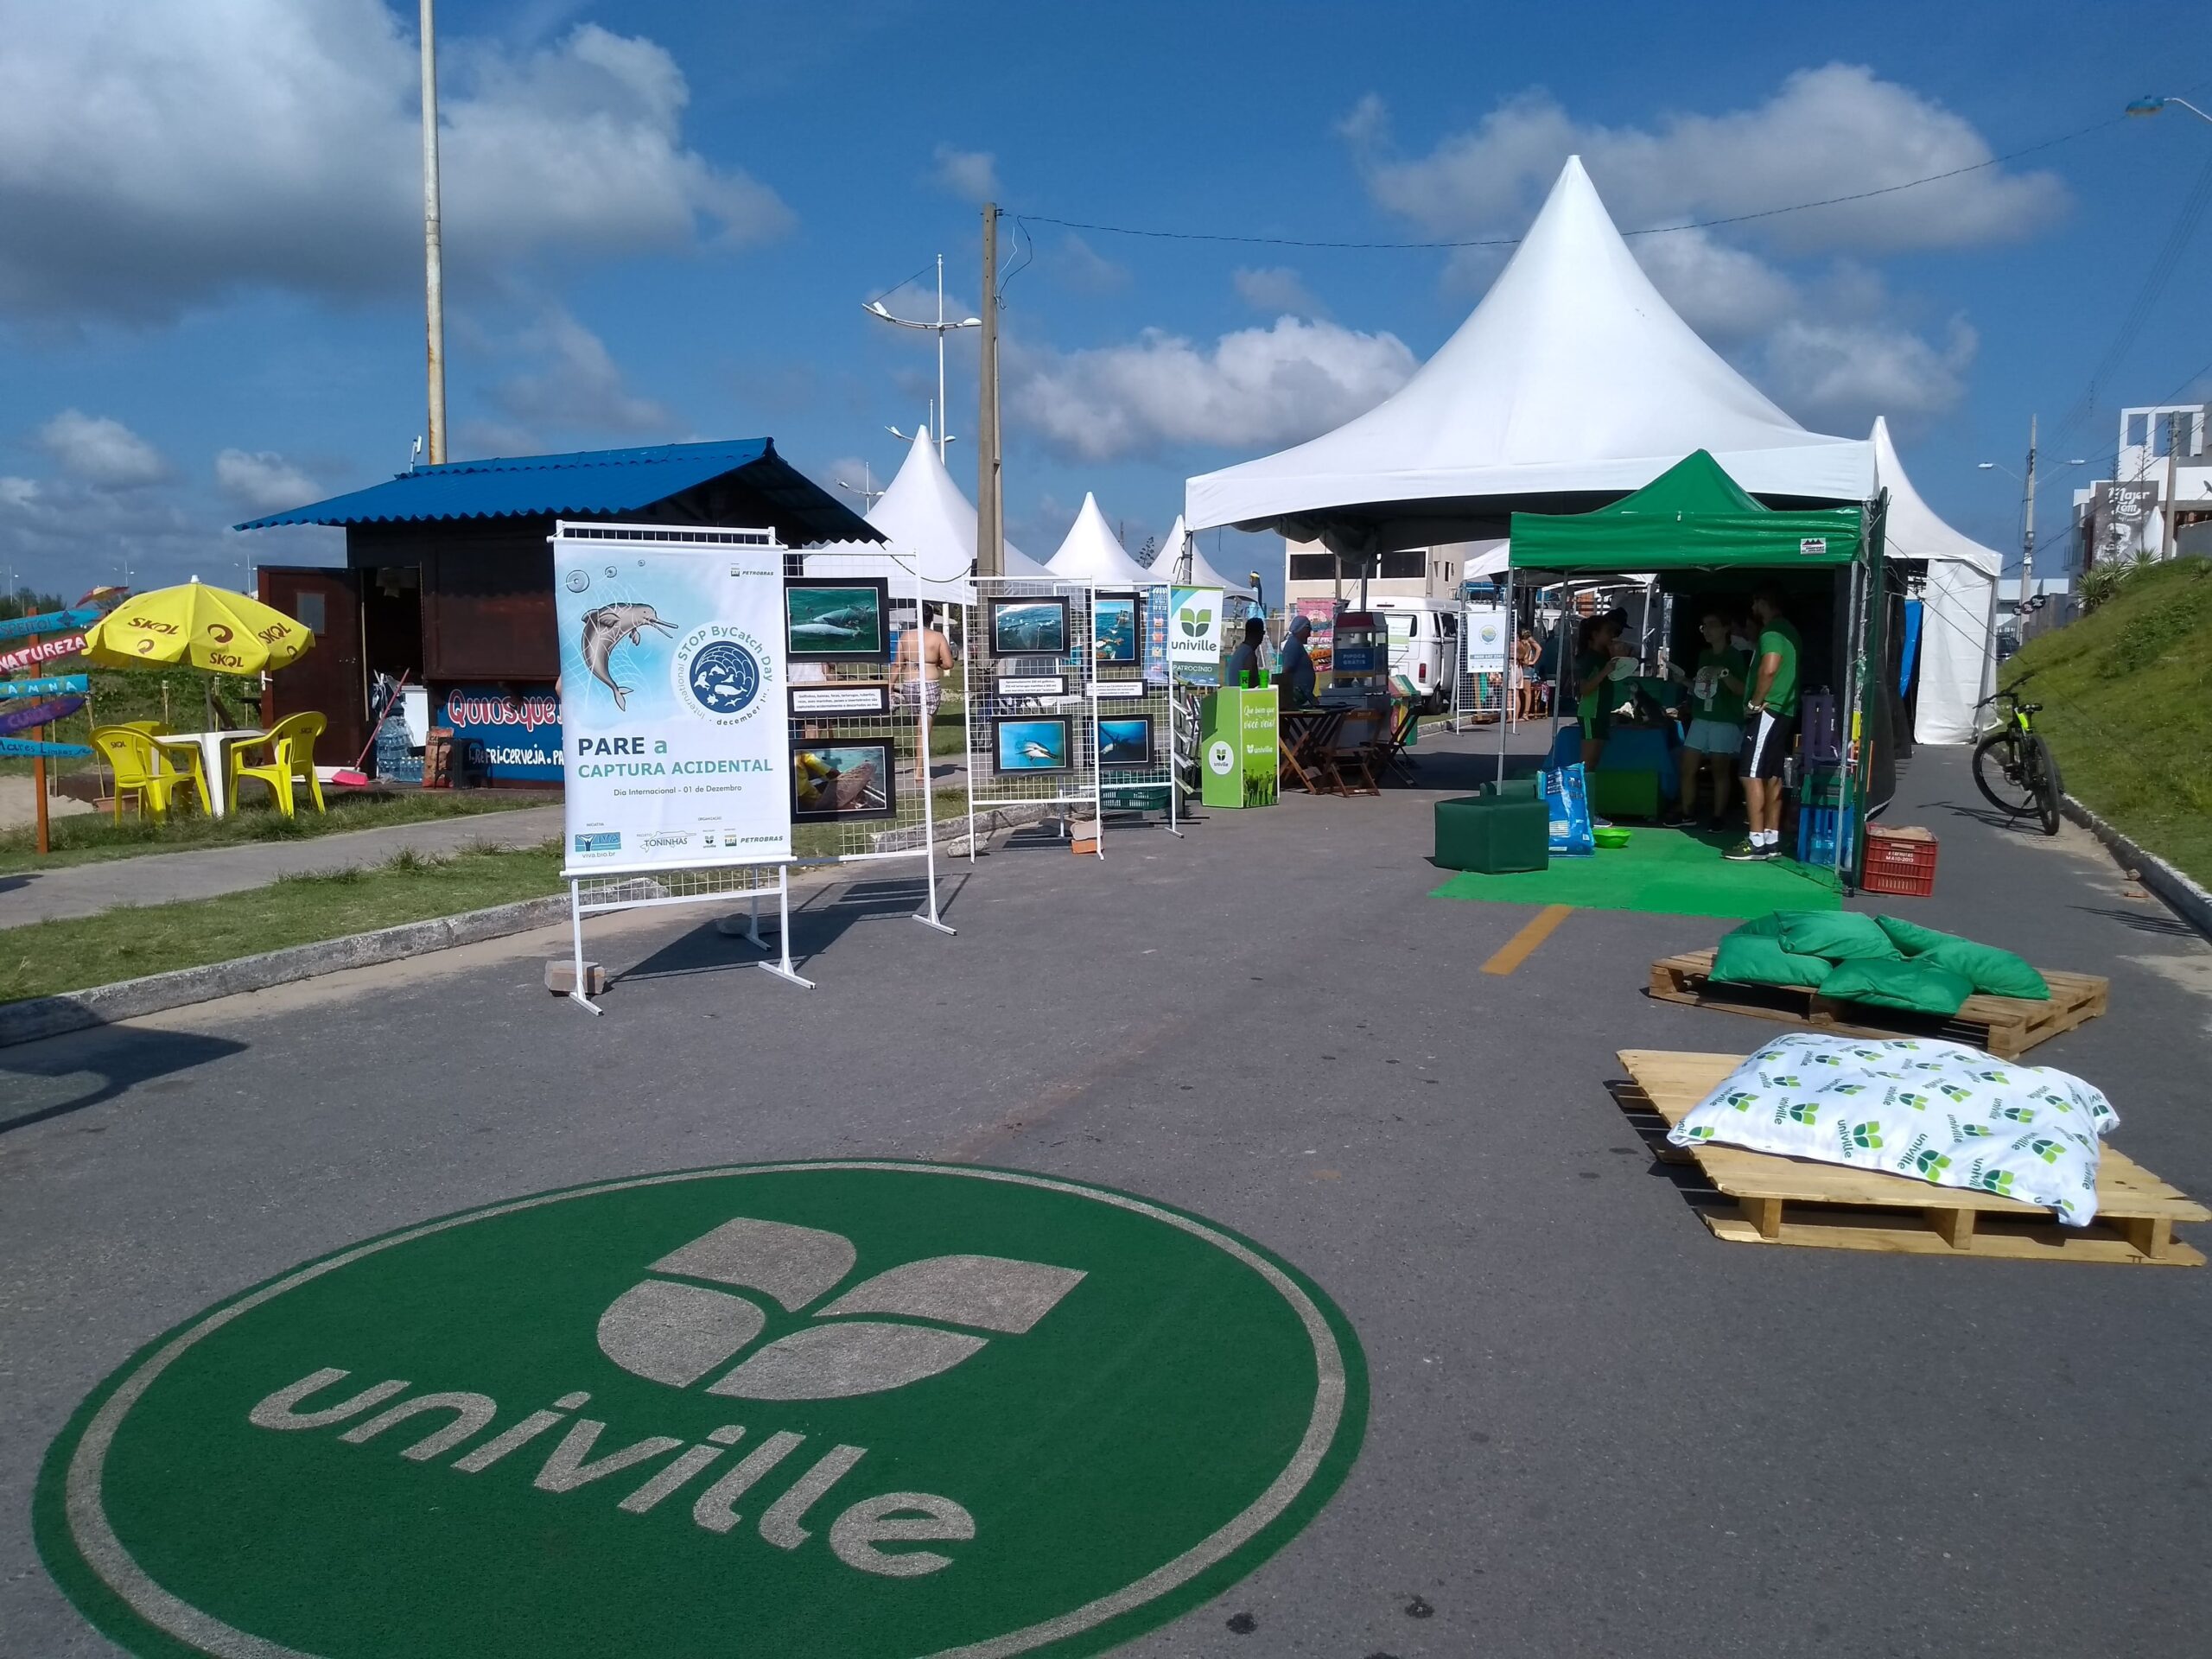 Univille stand at the Chef’s event on the beach in November 2019.